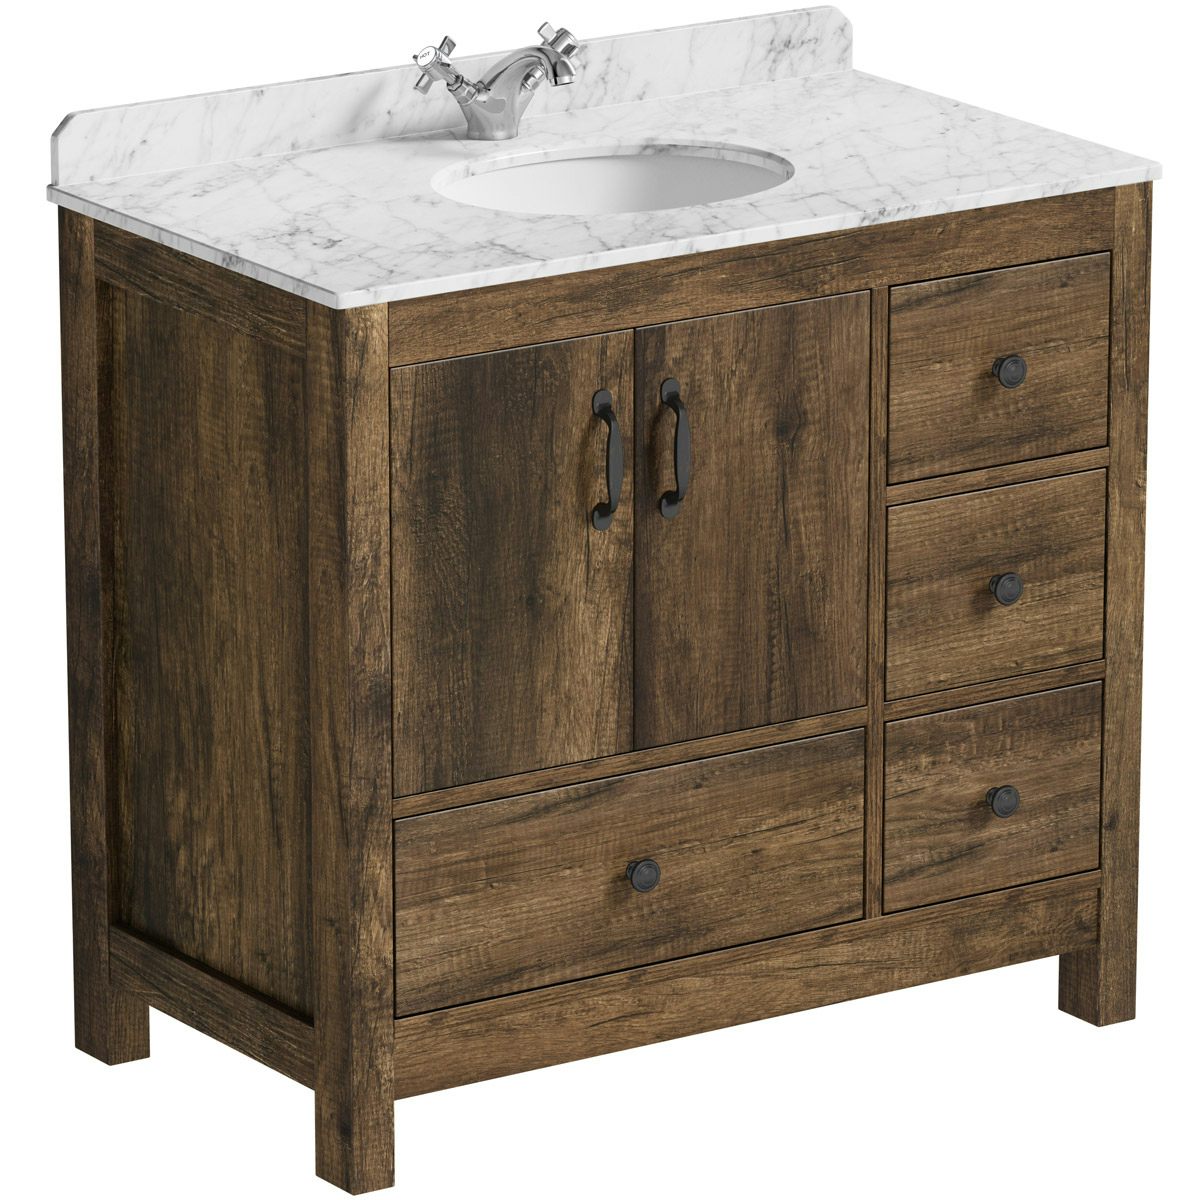 The Bath Co. Dalston floorstanding vanity unit and white marble basin 900mm with tap